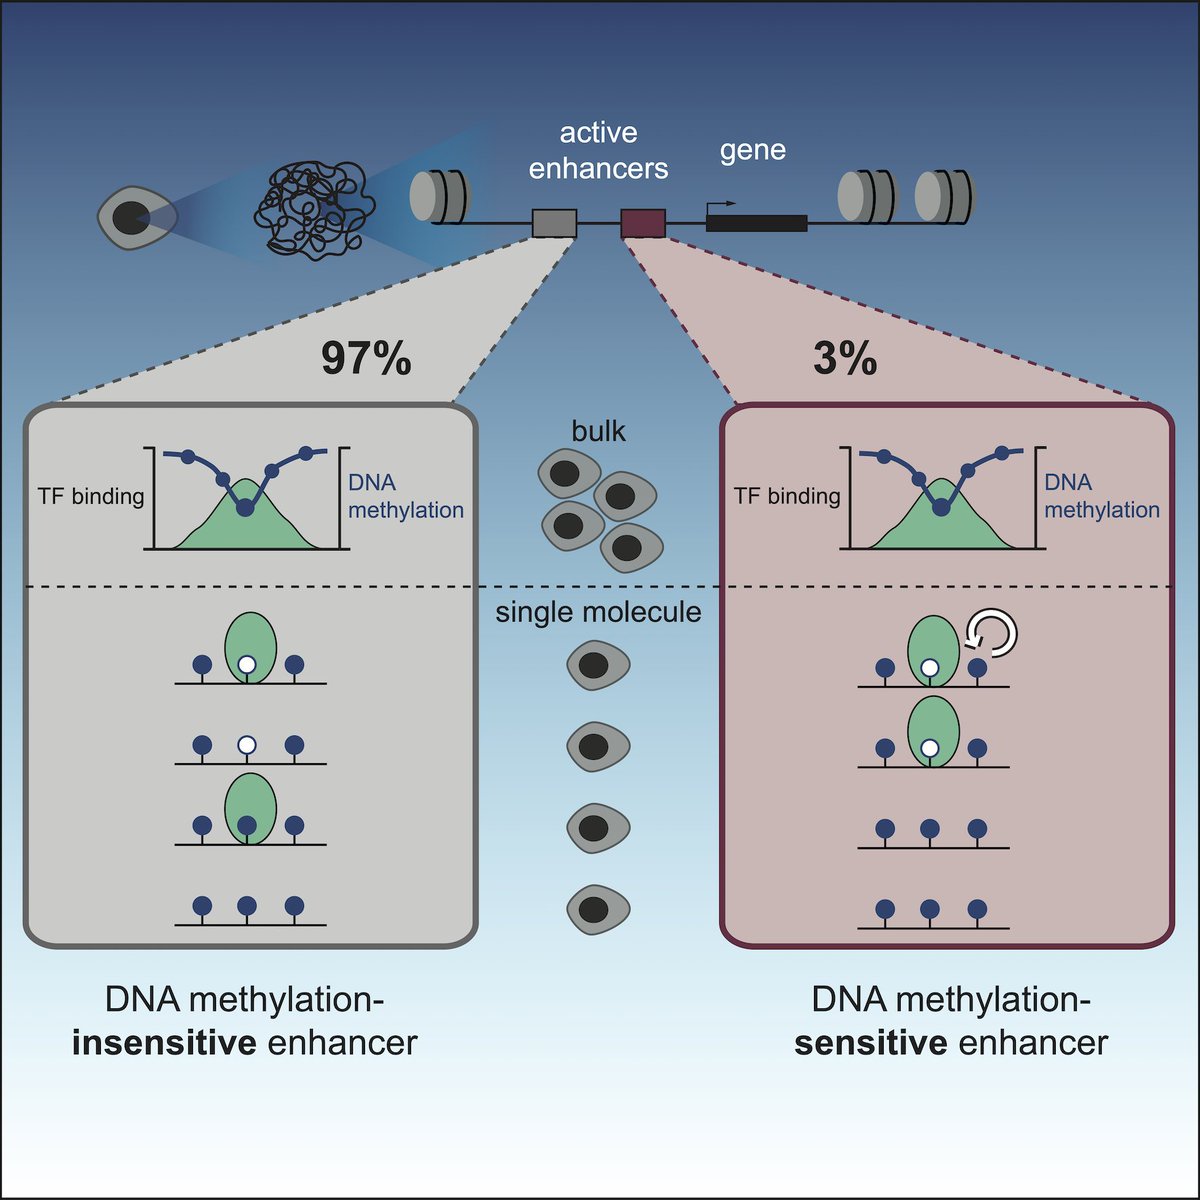 Happy to announce that our story on #DNAmethylation at #enhancers is out today in @MolecularCell! tinyurl.com/smc5yccy 
It was a fantastic PhD journey in the lab of @arnaud_kr @EMBL. 
Follow the 🧵 to find out whether #DNAmethylation is important for enhancer activity:
(1/9)